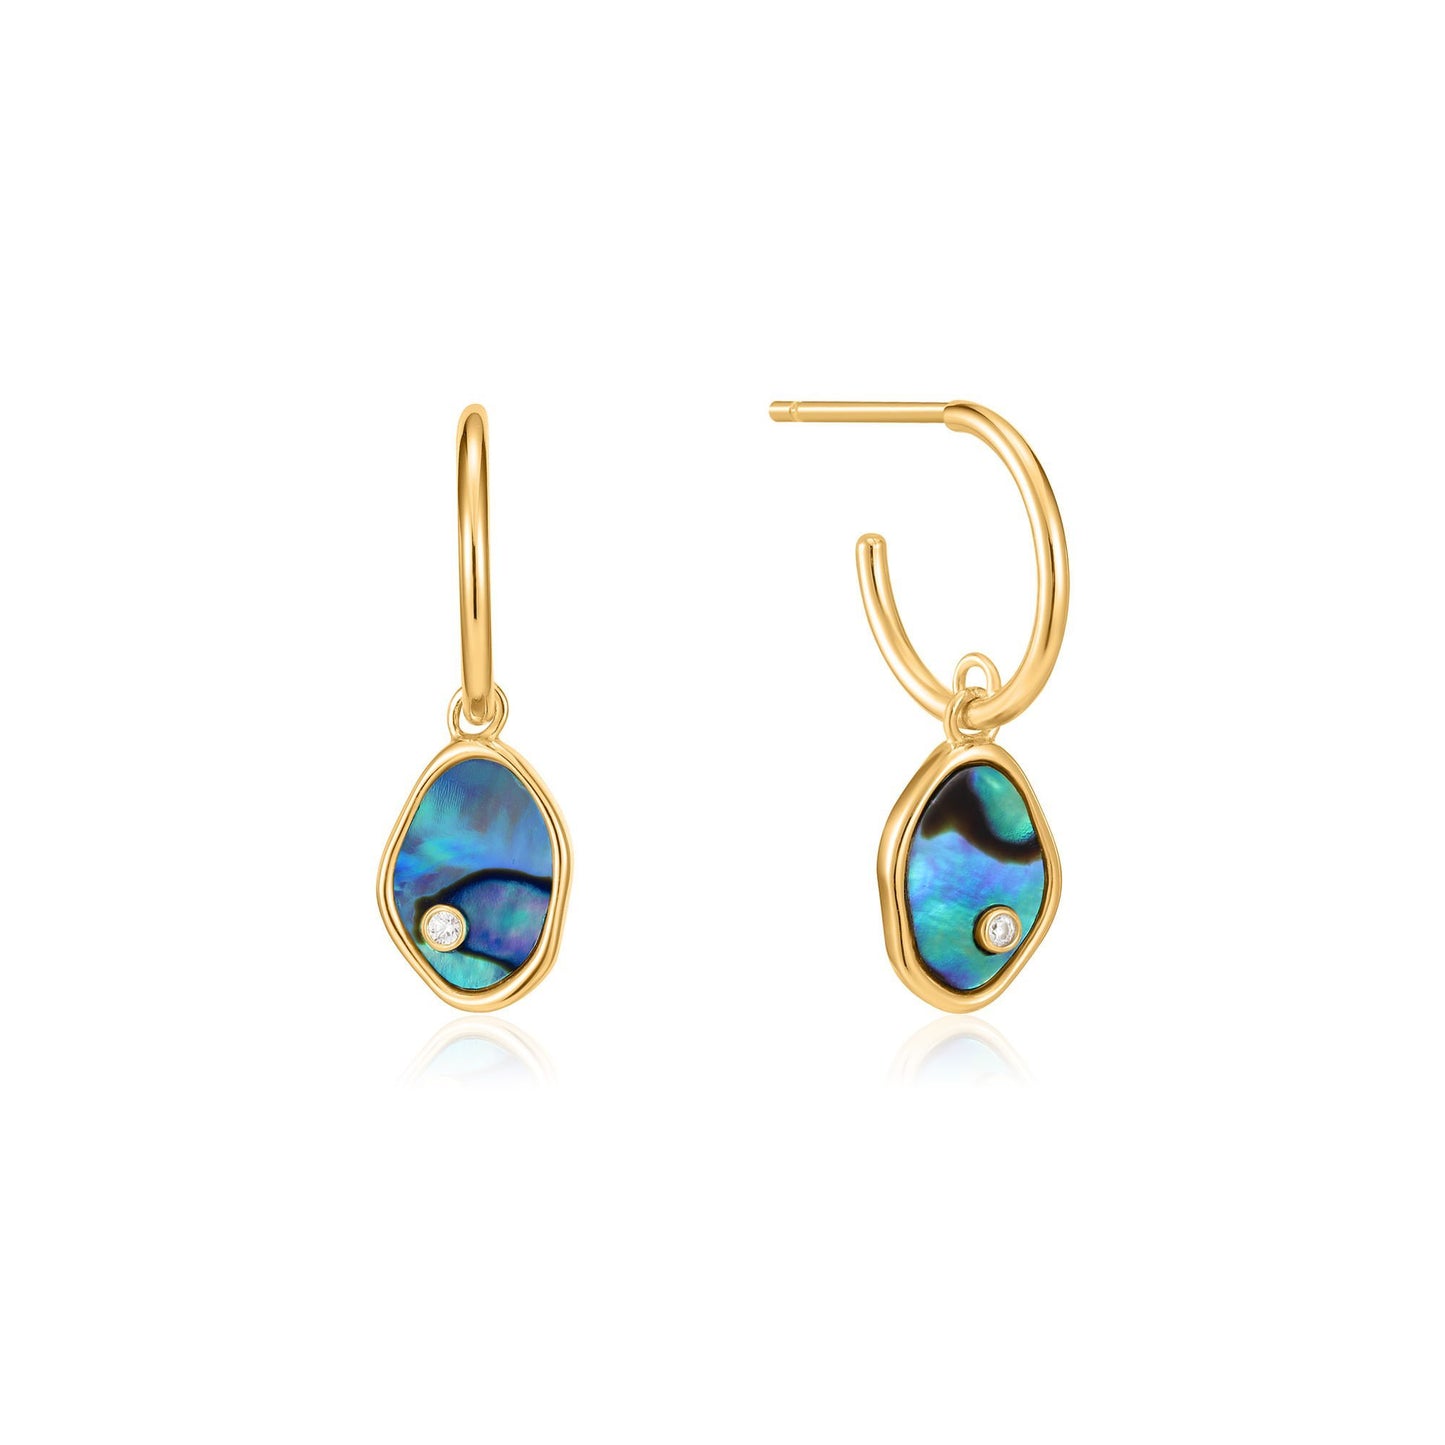 ANIA HAIE ANIA HAIE - Gold Tidal Abalone Mini Hoop Earrings available at The Good Life Boutique